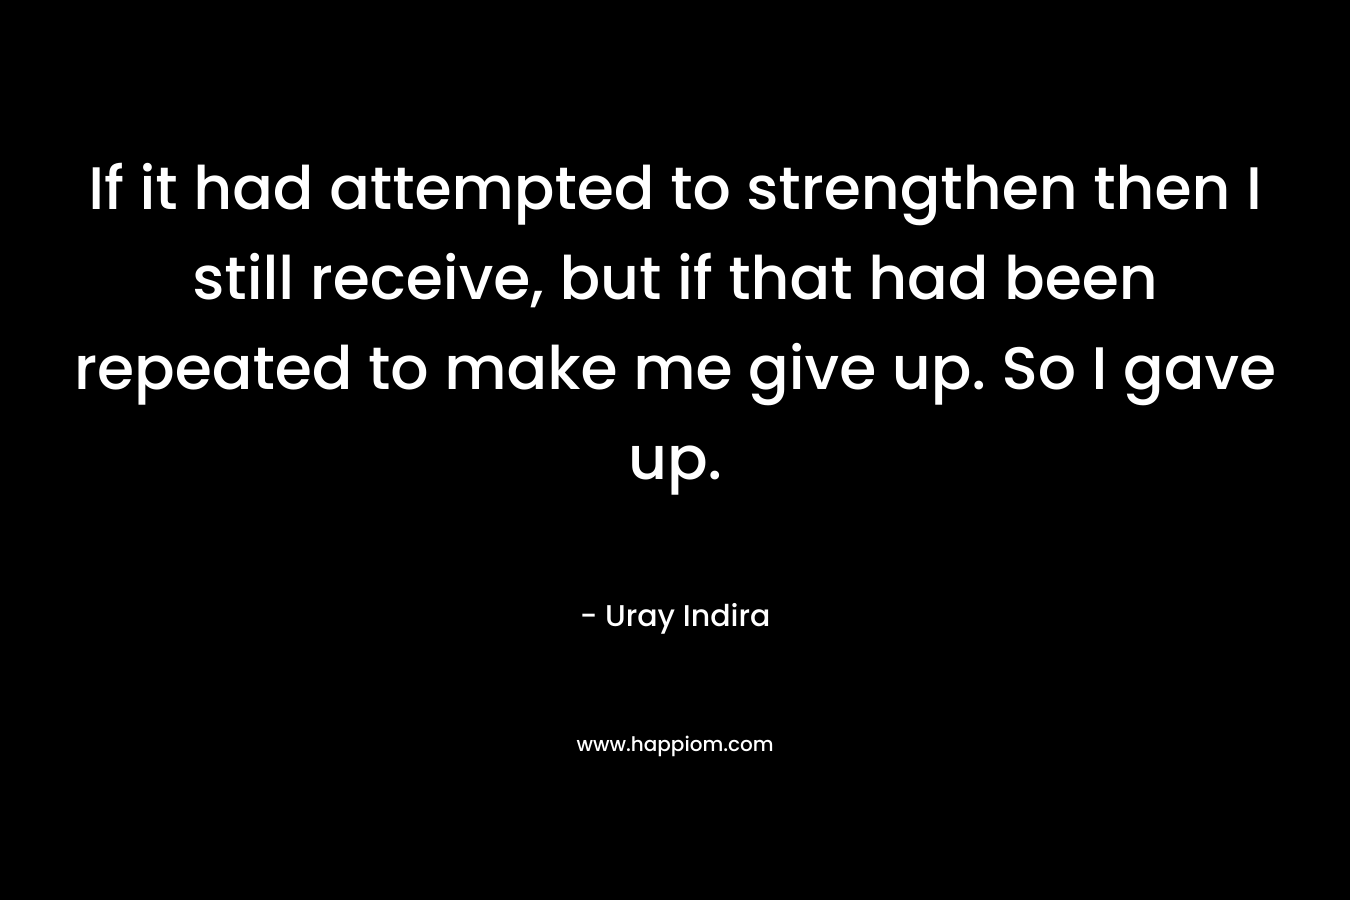 If it had attempted to strengthen then I still receive, but if that had been repeated to make me give up. So I gave up. – Uray Indira